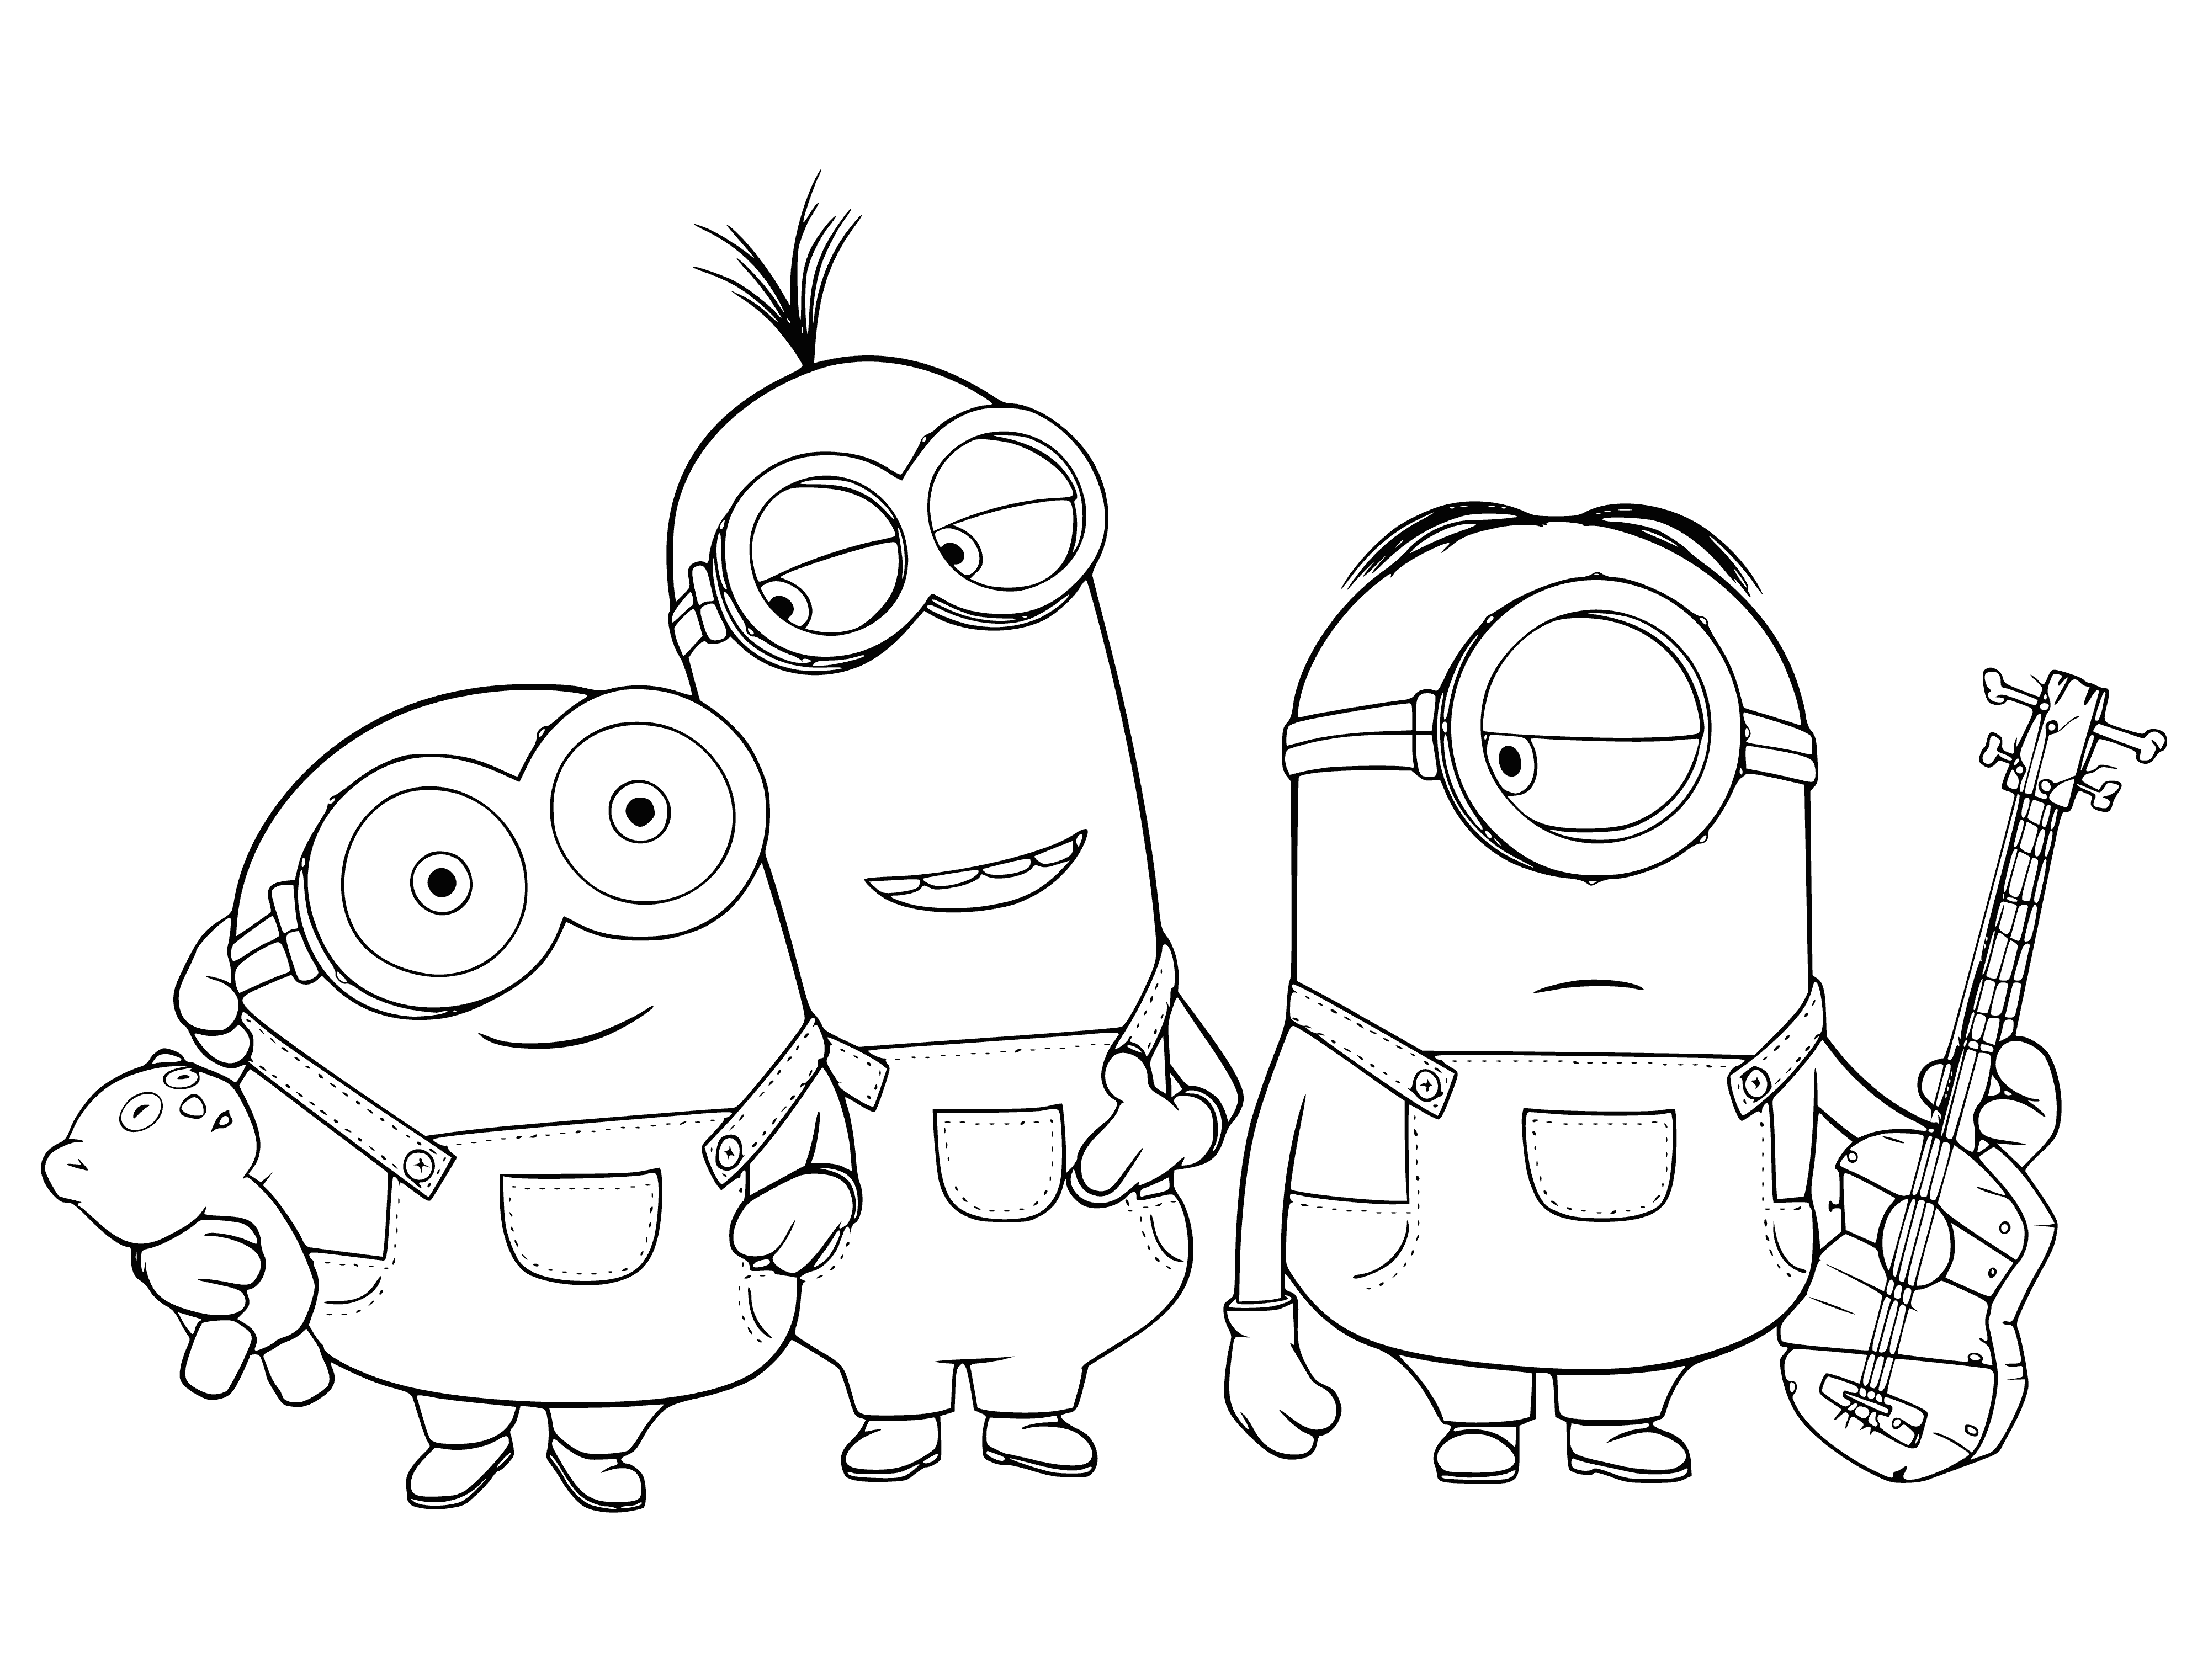 Minions Bob, Kevin and Stewart coloring page